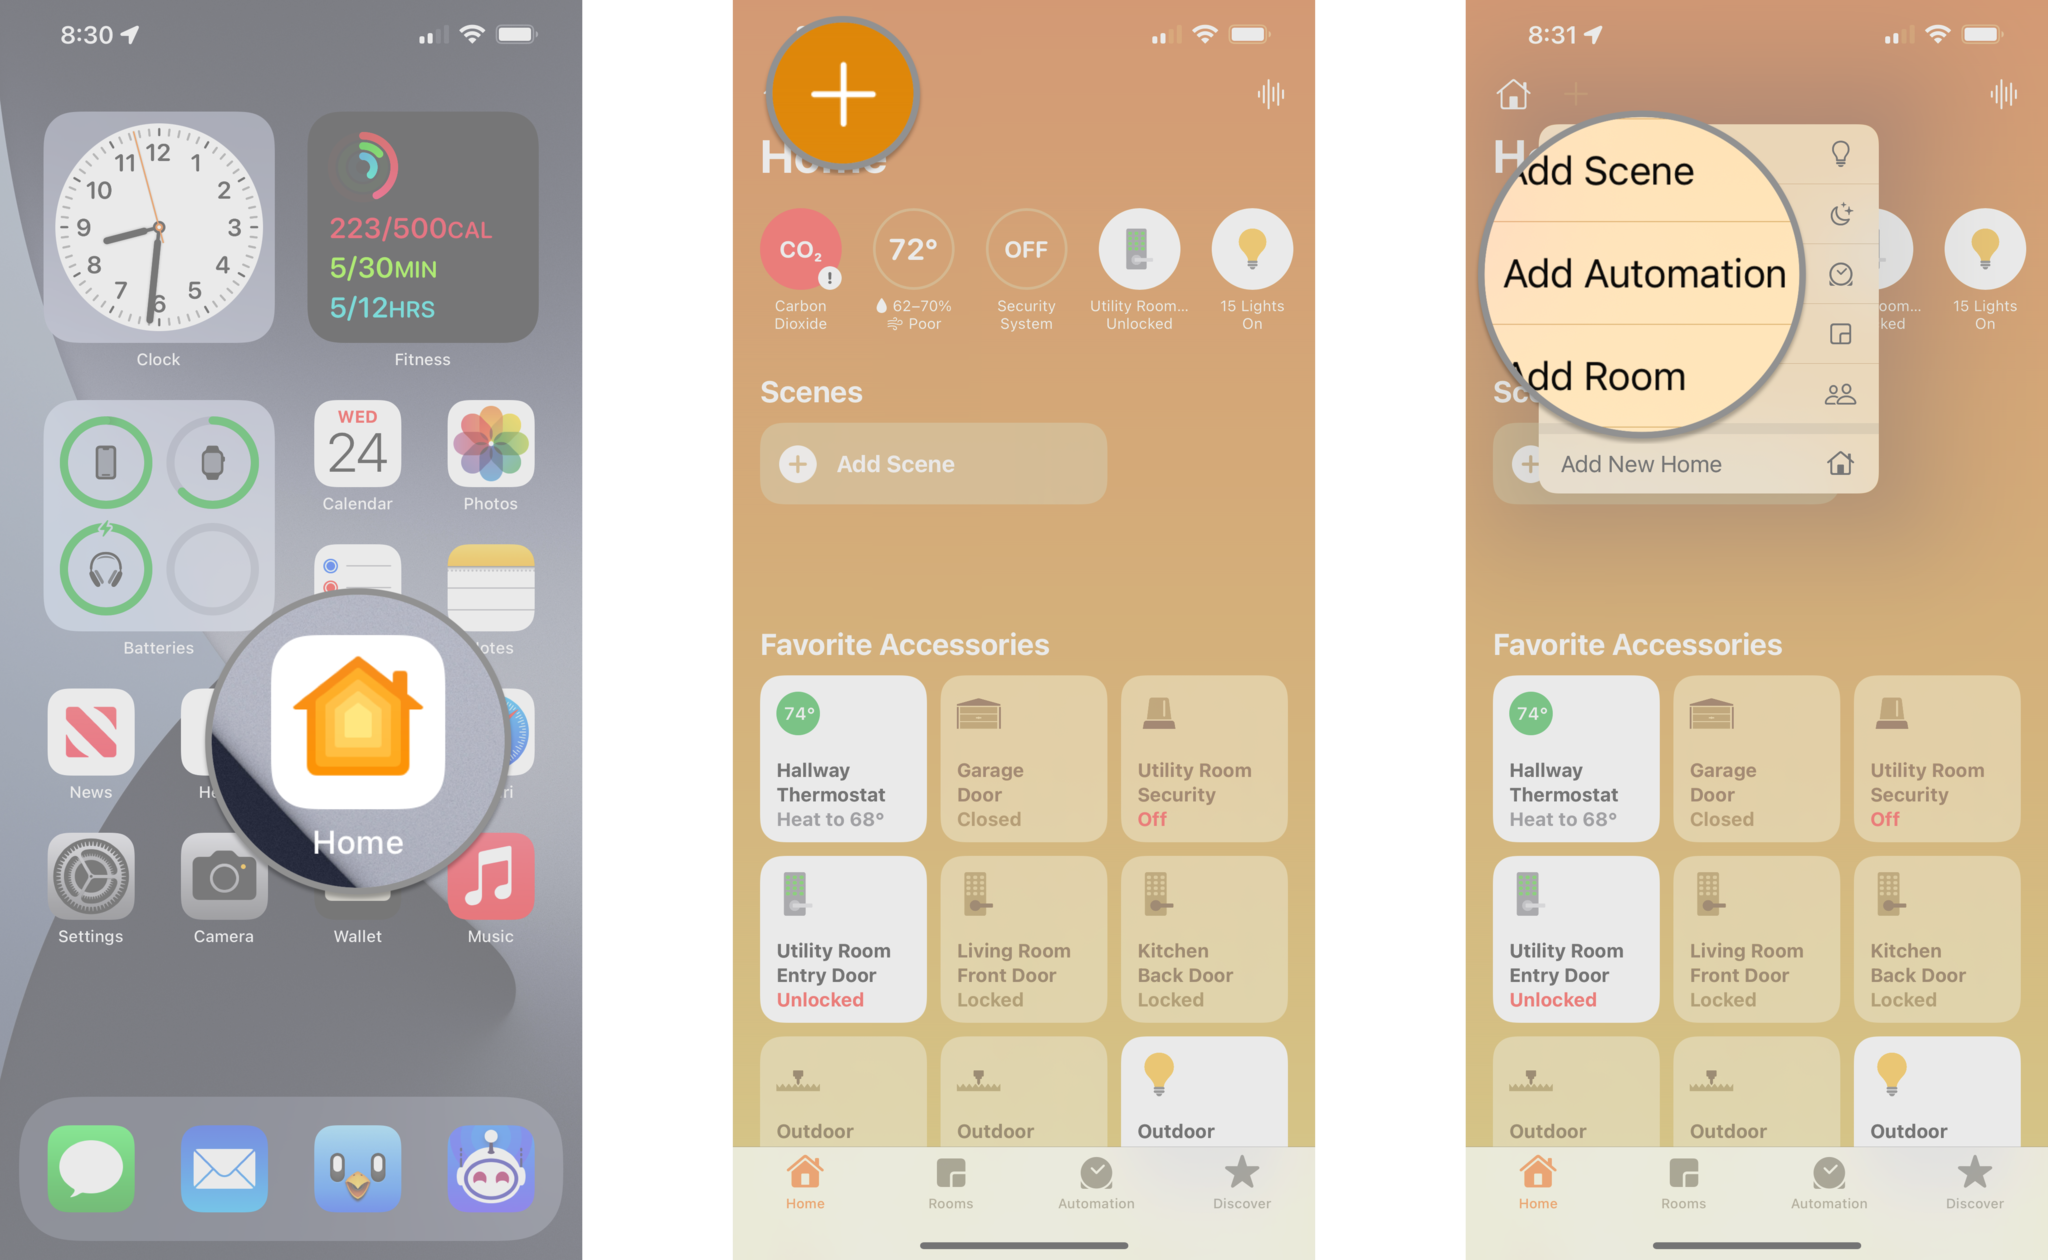 How to create an accessory automation in the Home app on the iPhone by showing steps: Launch the Home app, Tap the plus button, Tap Add Automation